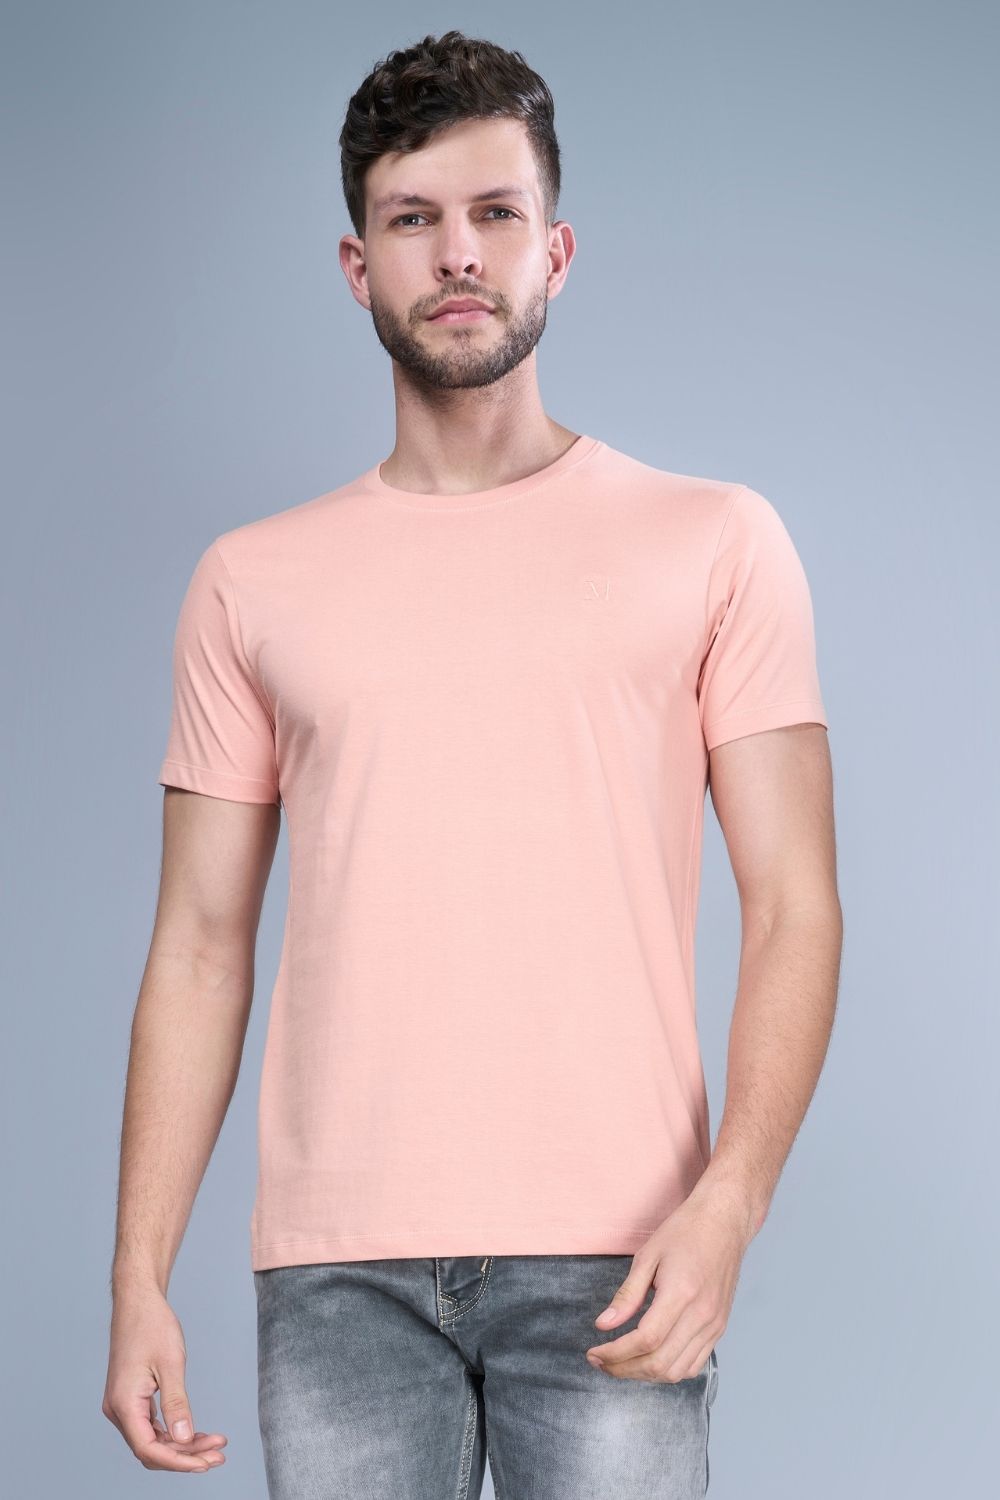 Light orange colored, Solid T shirt for men, with half sleeves and round neck.